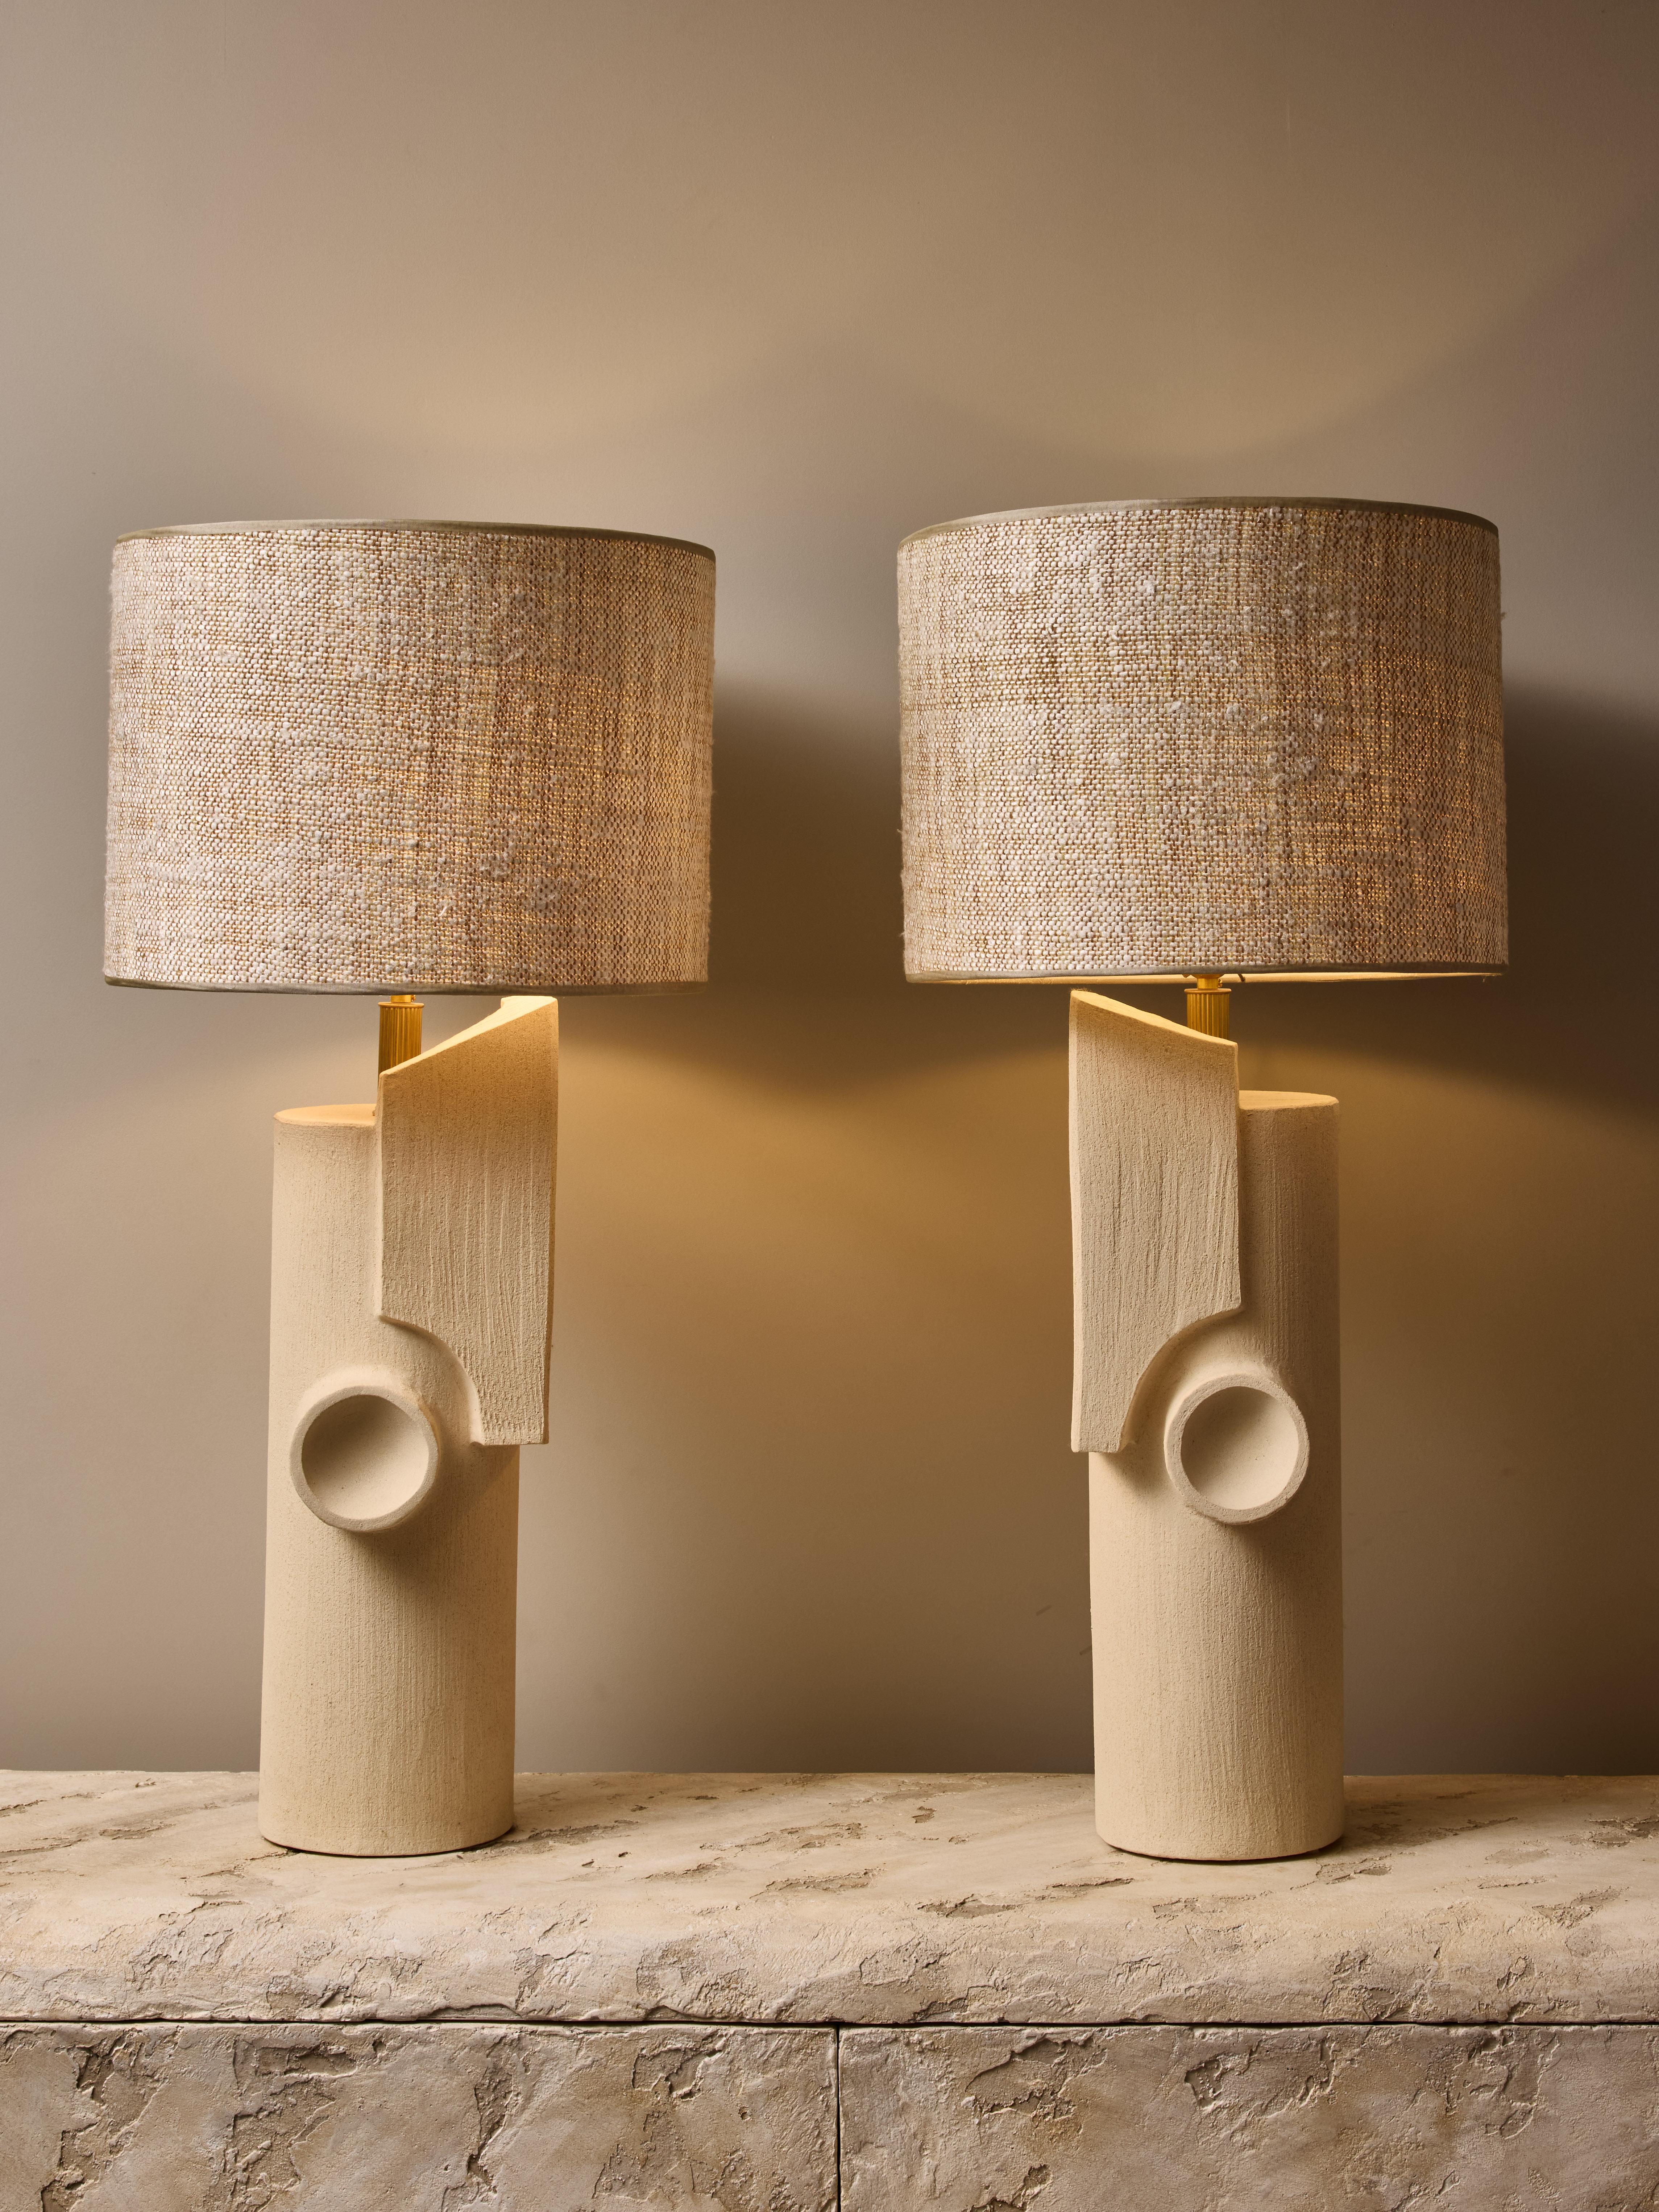 Pair of ceramic table lamps by the talented french contemporary artist Olivia Cognet.

These large tubular shape lamps have mirrored, almost book end, design of sharp geometrical shapes, brass hardware and topped with a custom lampshade.

Stamped on